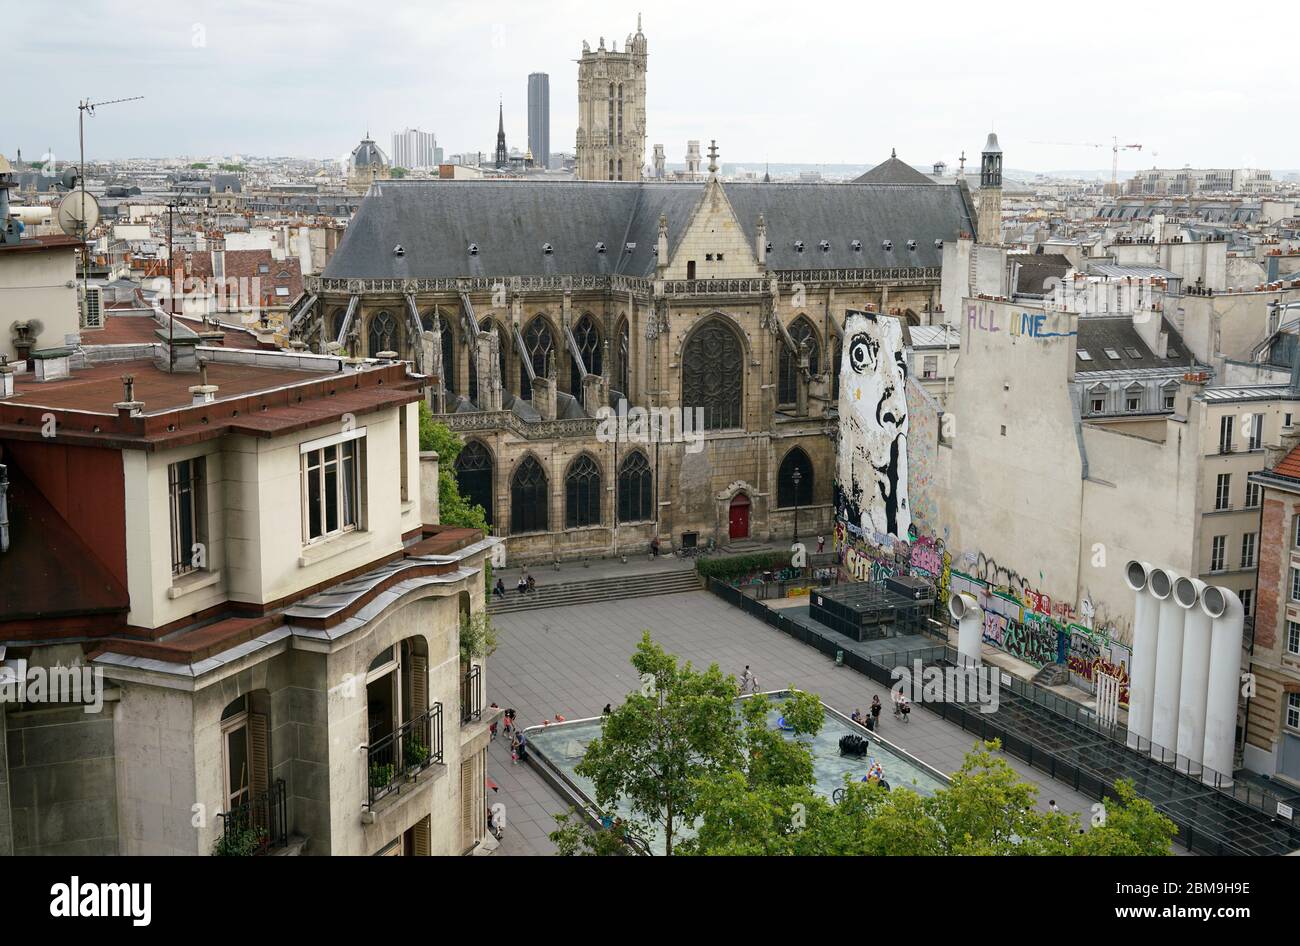 The view of Beaubourg area with Eglise Saint-Merri church in the background from Pompidou Centre.Paris.France Stock Photo